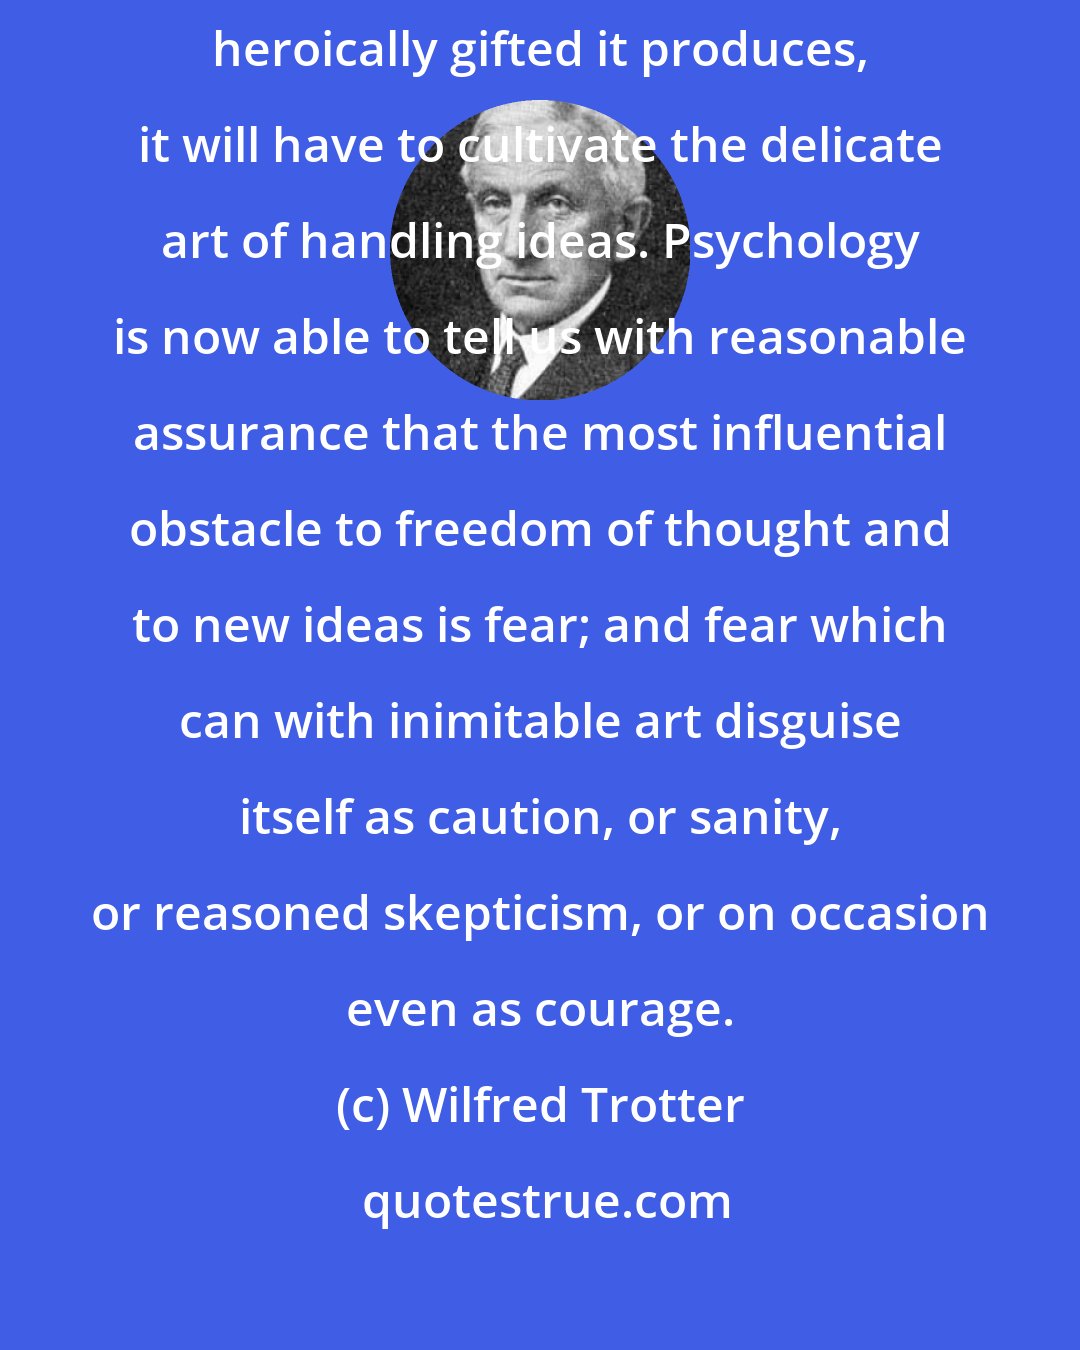 Wilfred Trotter: If mankind is to profit freely from the small and sporadic crop of the heroically gifted it produces, it will have to cultivate the delicate art of handling ideas. Psychology is now able to tell us with reasonable assurance that the most influential obstacle to freedom of thought and to new ideas is fear; and fear which can with inimitable art disguise itself as caution, or sanity, or reasoned skepticism, or on occasion even as courage.